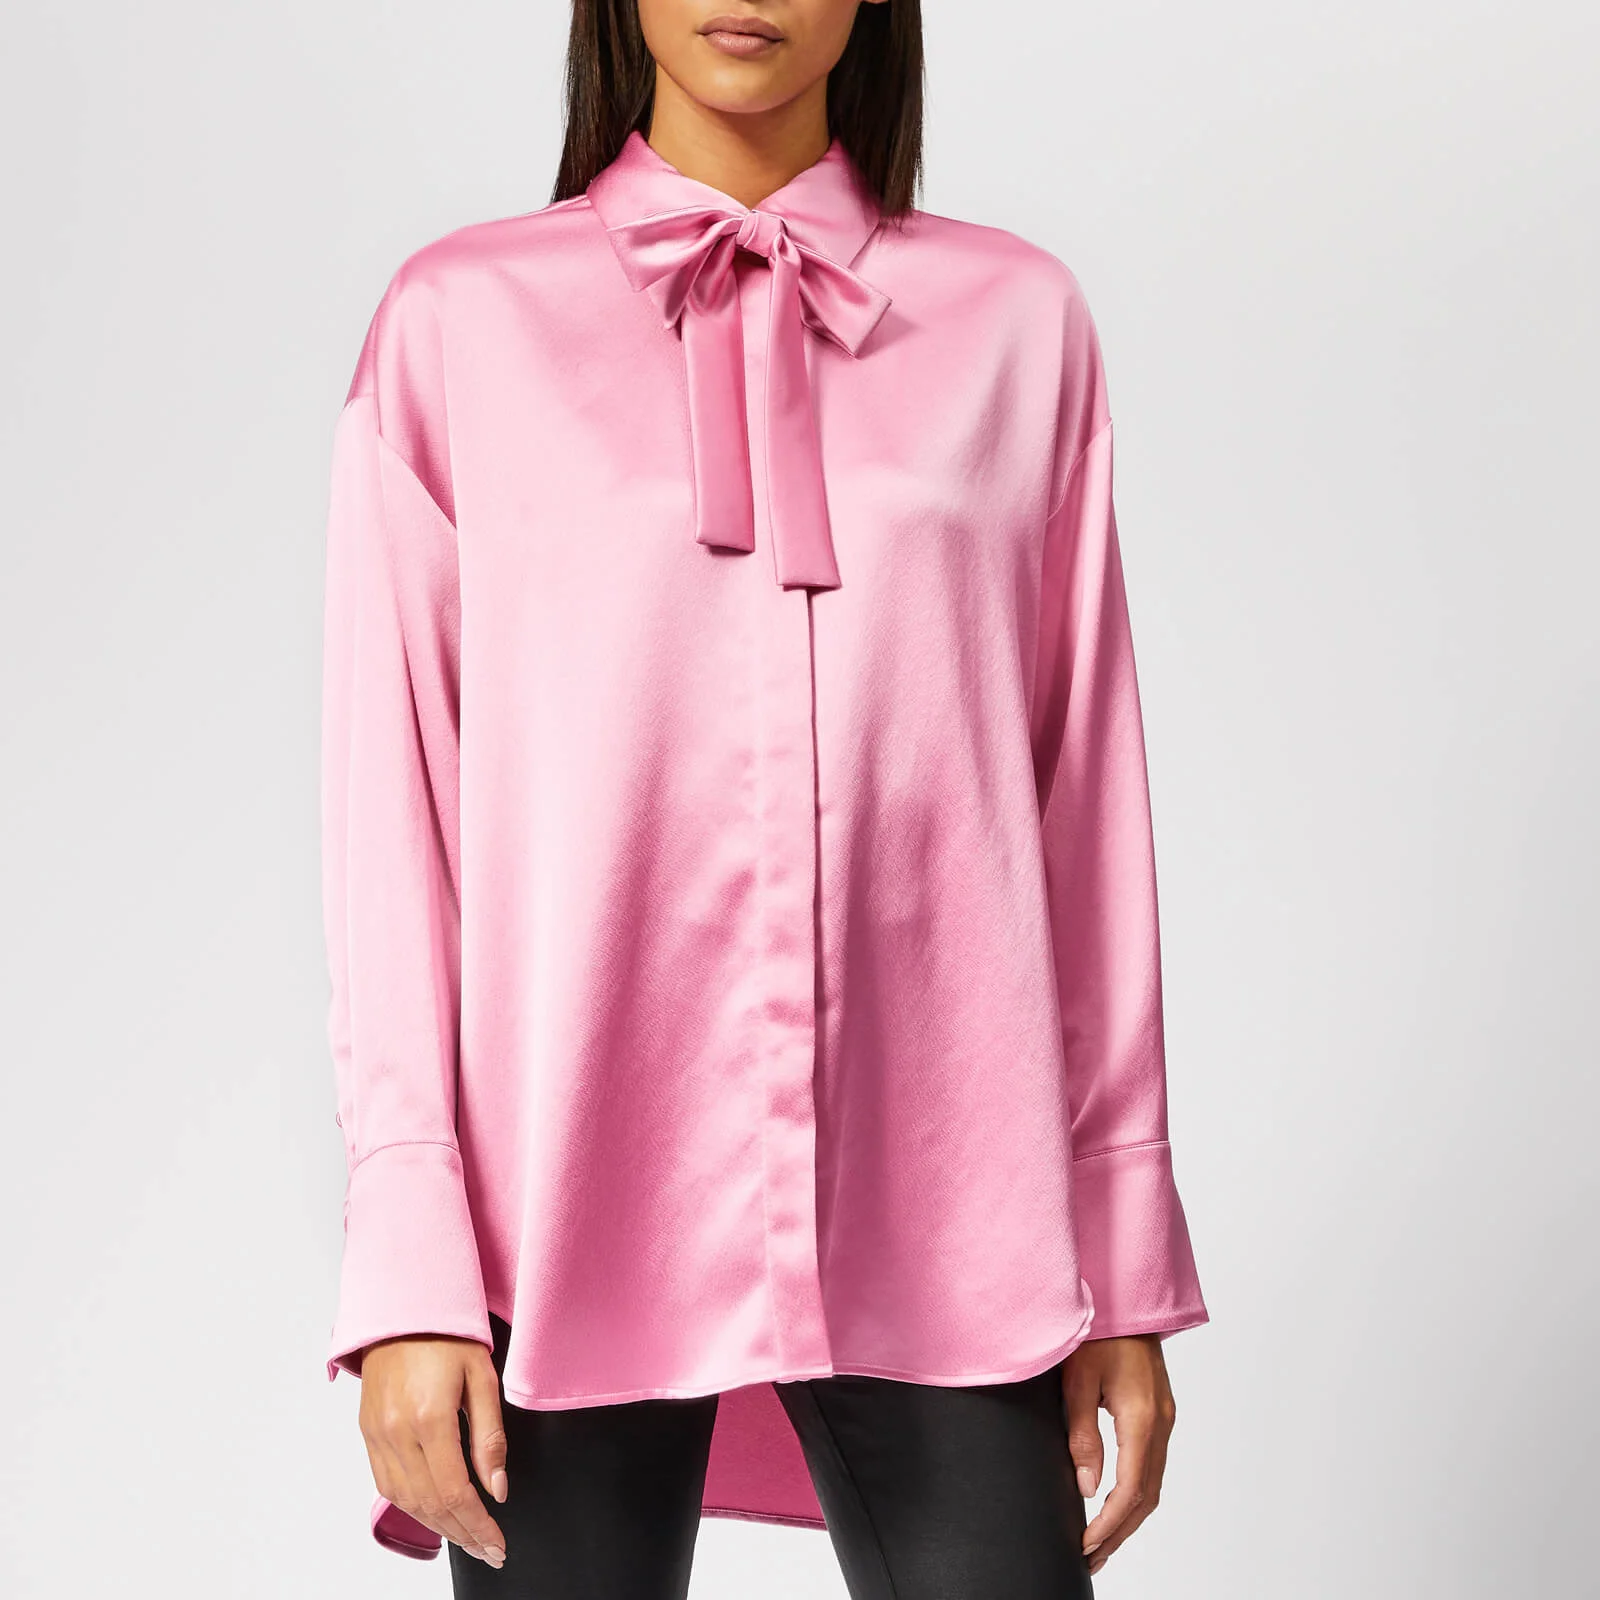 MSGM Women's Shirt with Logo on Back - Pink Image 1